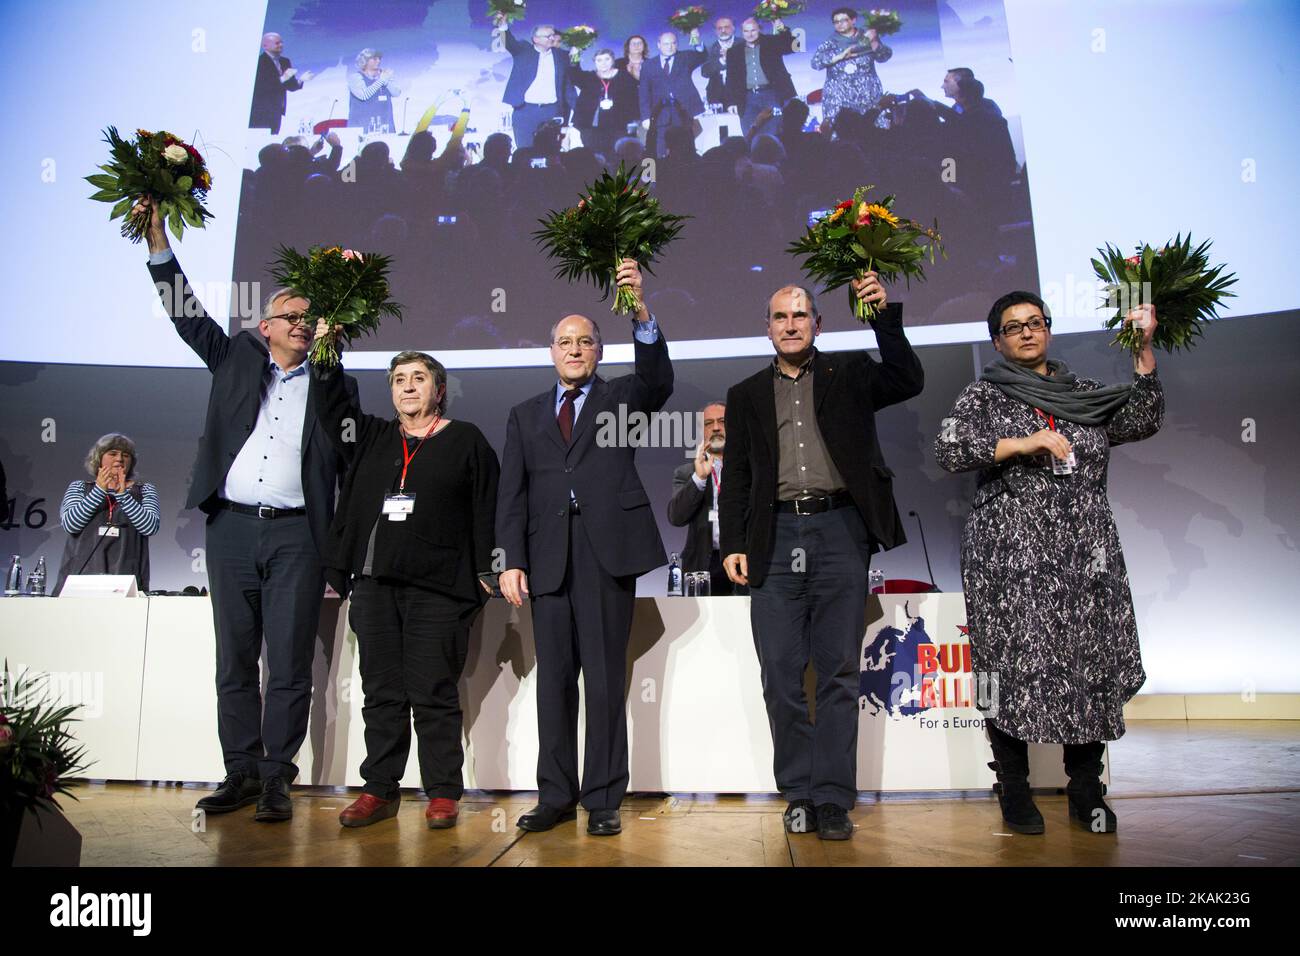 New president of the Party of the European Left Gregor Gysi (Die Linke, 2R), and Vice Presidents Pierre Laurent (French Communist Party, L), Maite Mola (Partido Comunista de Espana, 2L) and Paolo Ferrero (Rifondazione Comunista, R) hold flowers after their election during the 5th congress of the Party of the European Left in Berlin, Germany on December 17, 2016. The congress is finding place from December 16 to 18, 2016. (Photo by Emmanuele Contini/NurPhoto) *** Please Use Credit from Credit Field *** Stock Photo